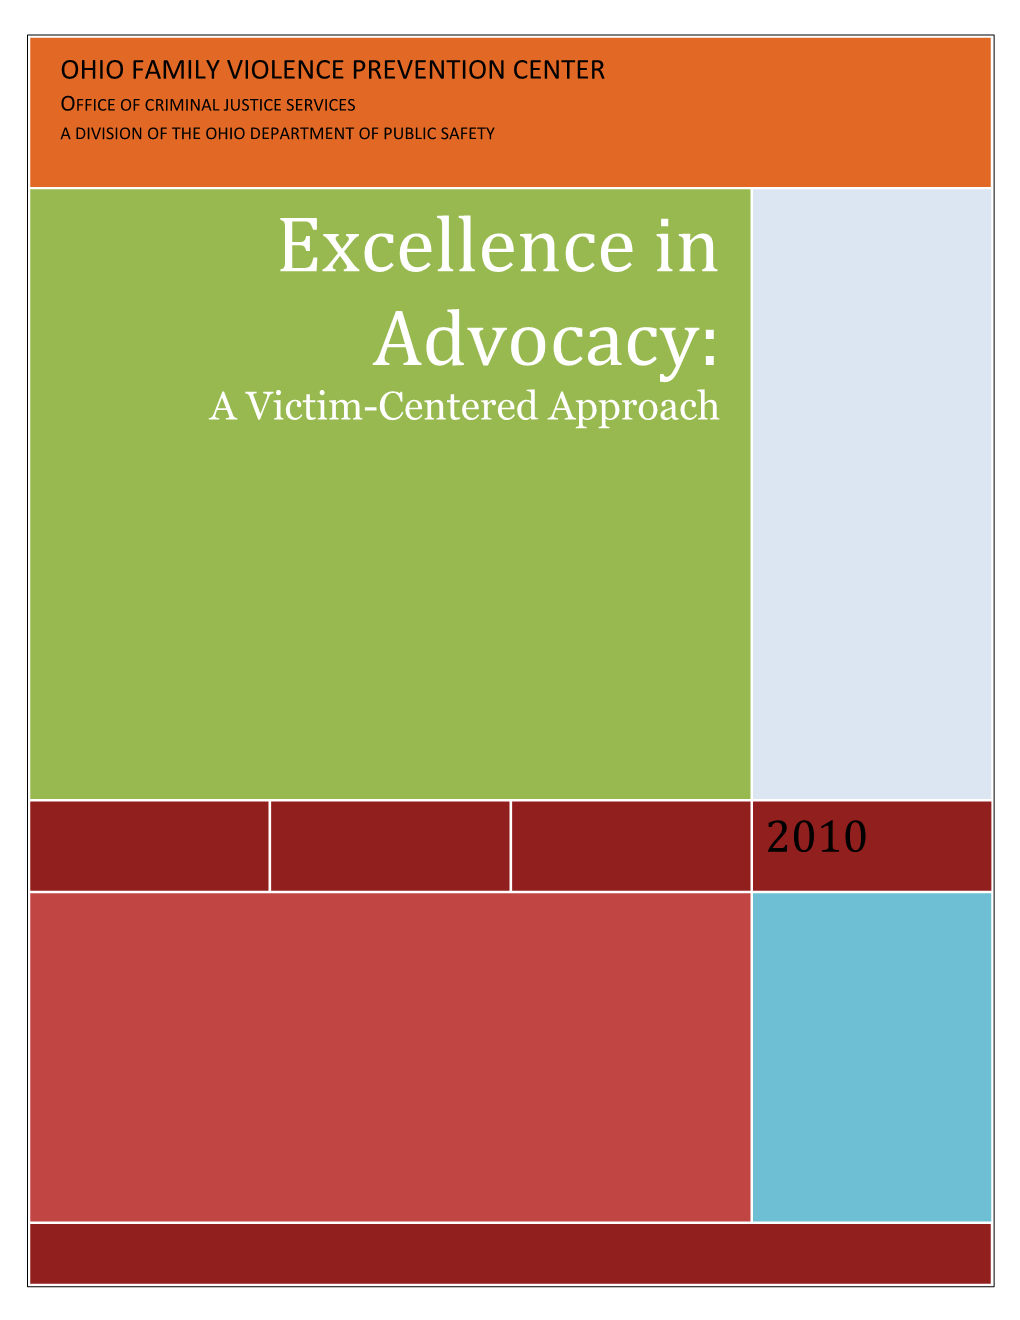 Excellence in Advocacy: a Victim-Centered Approach